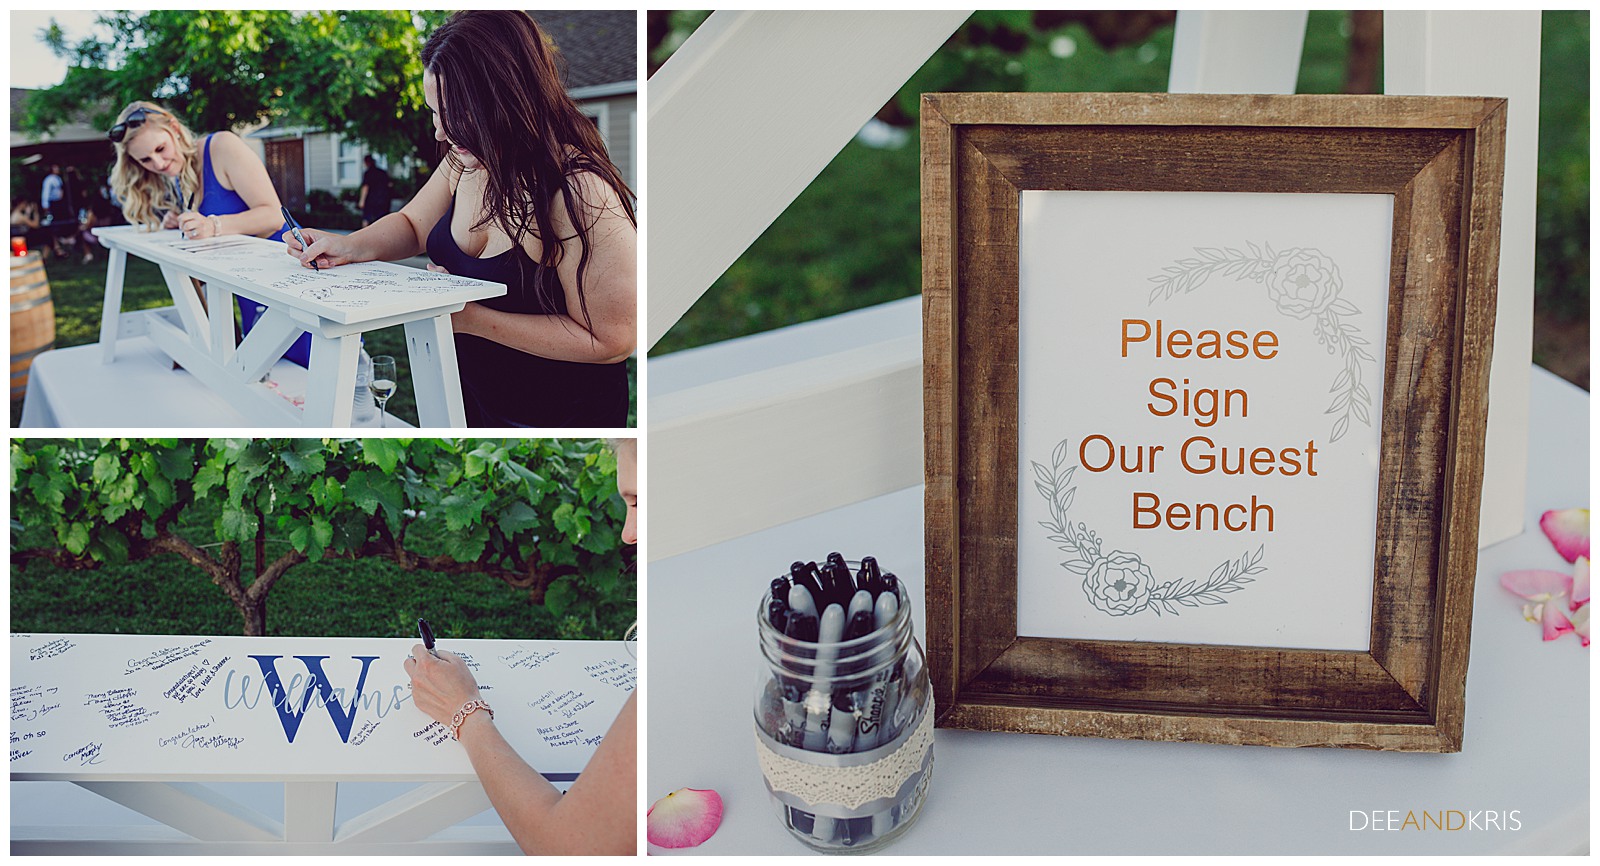 Wedding bench for guests to sign and send well wishes to bride and groom, unique wedding sign in ideas